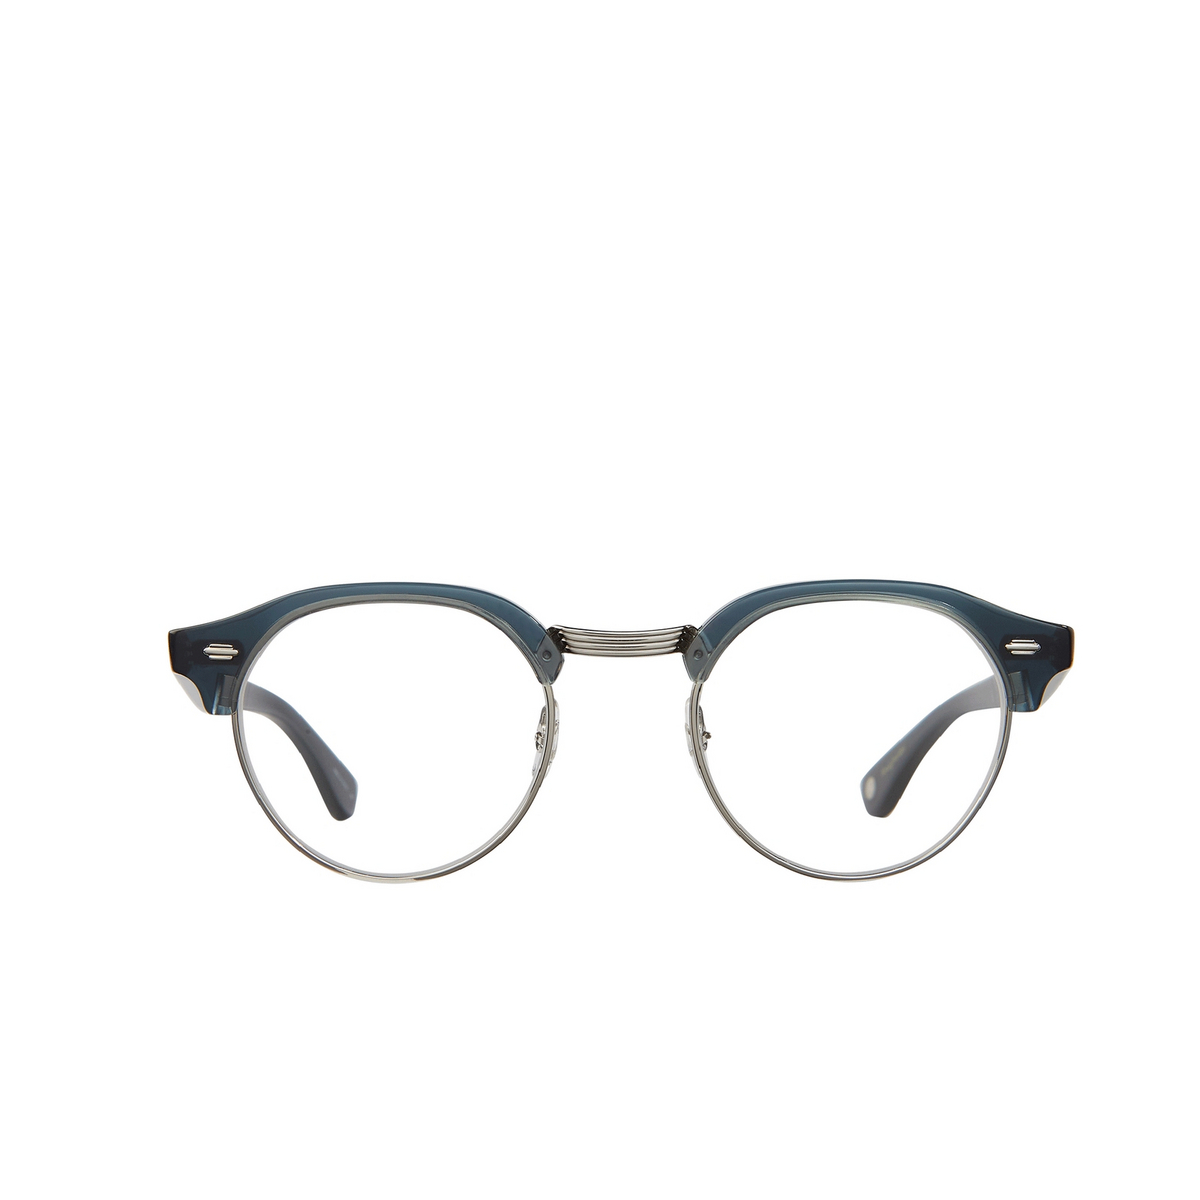 Garrett Leight® Round Eyeglasses: Oakwood color Navy-silver Nvy-s - front view.